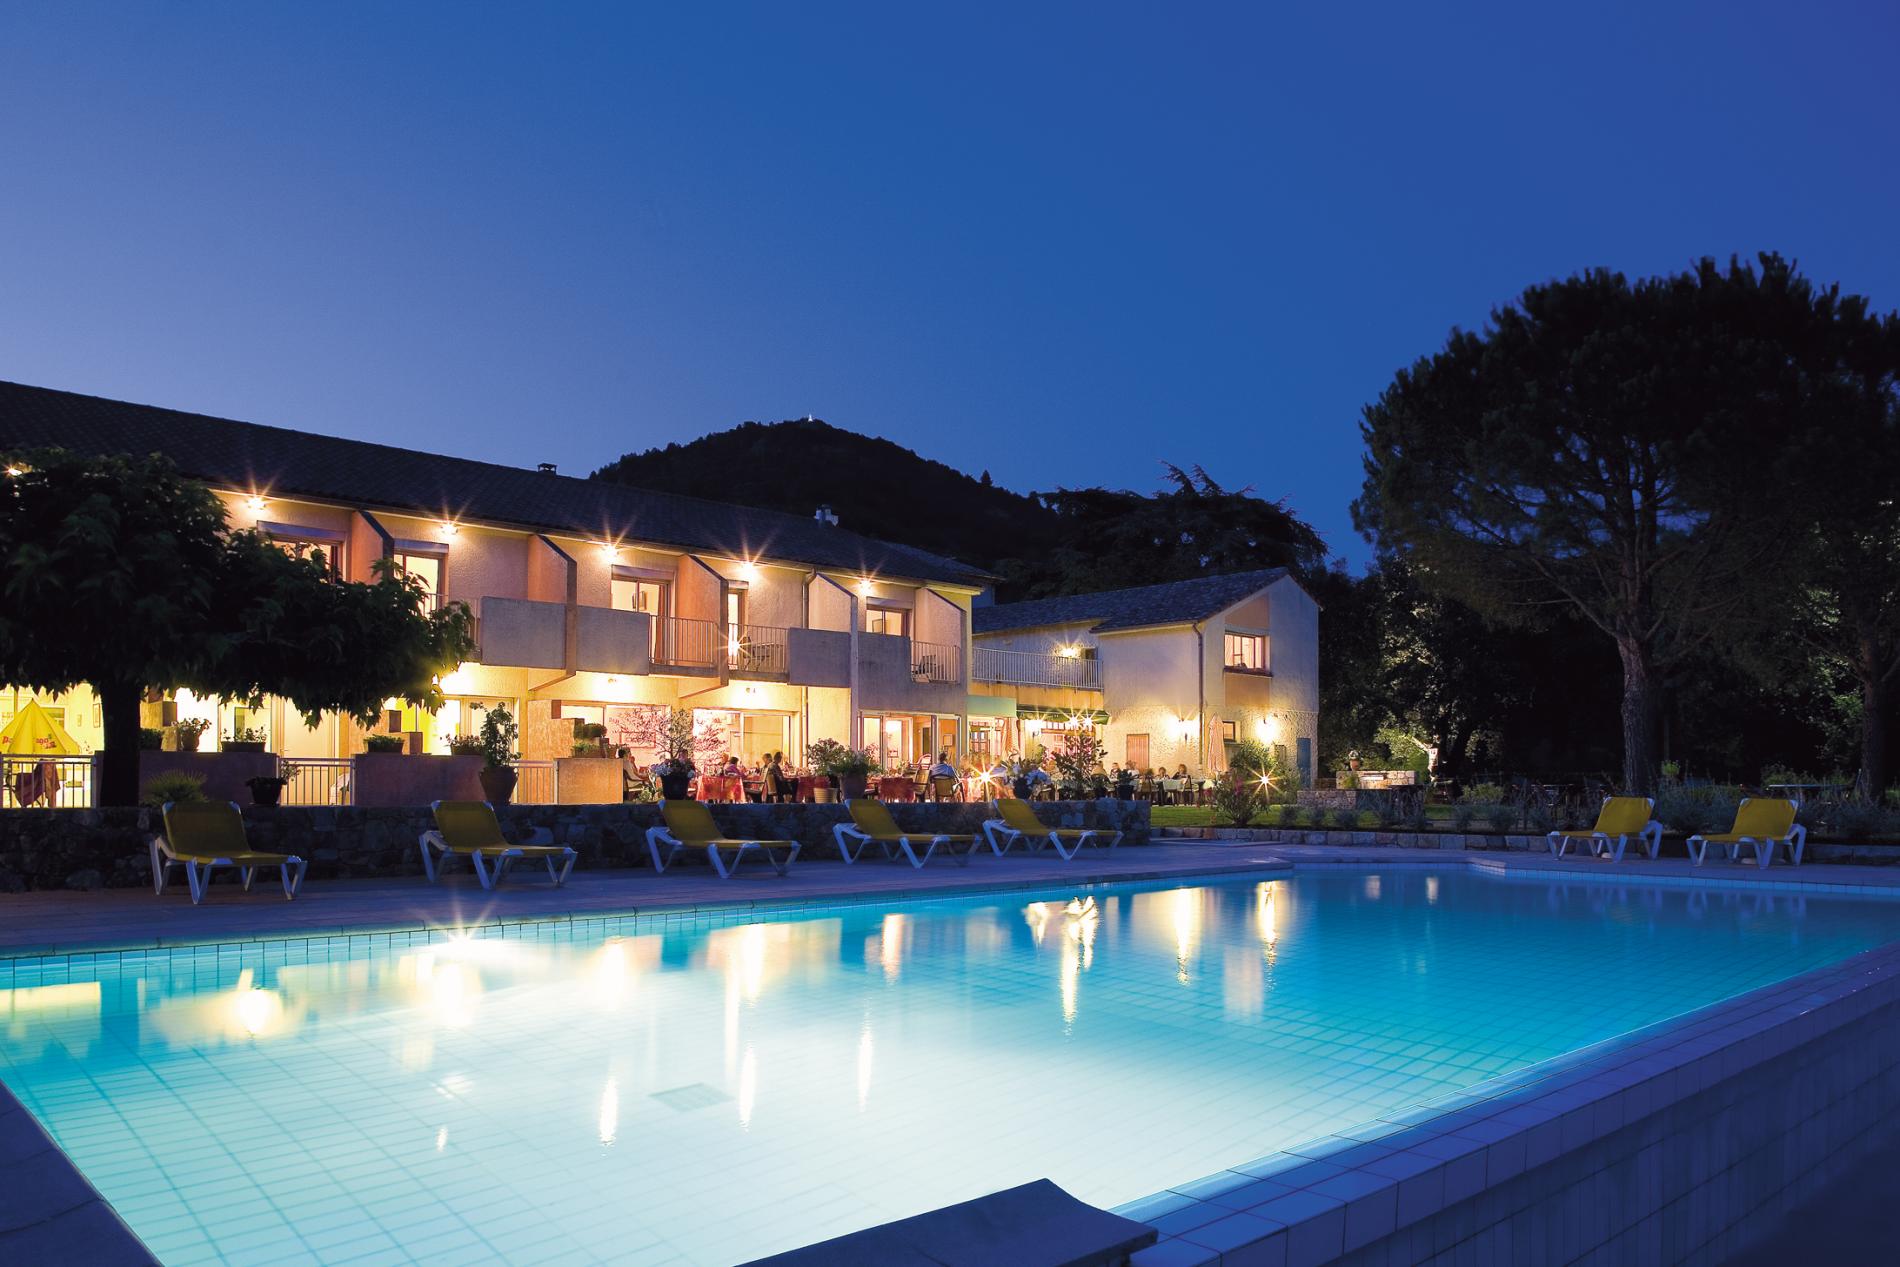 Logis Hotel in the heart of the southern Ardèche